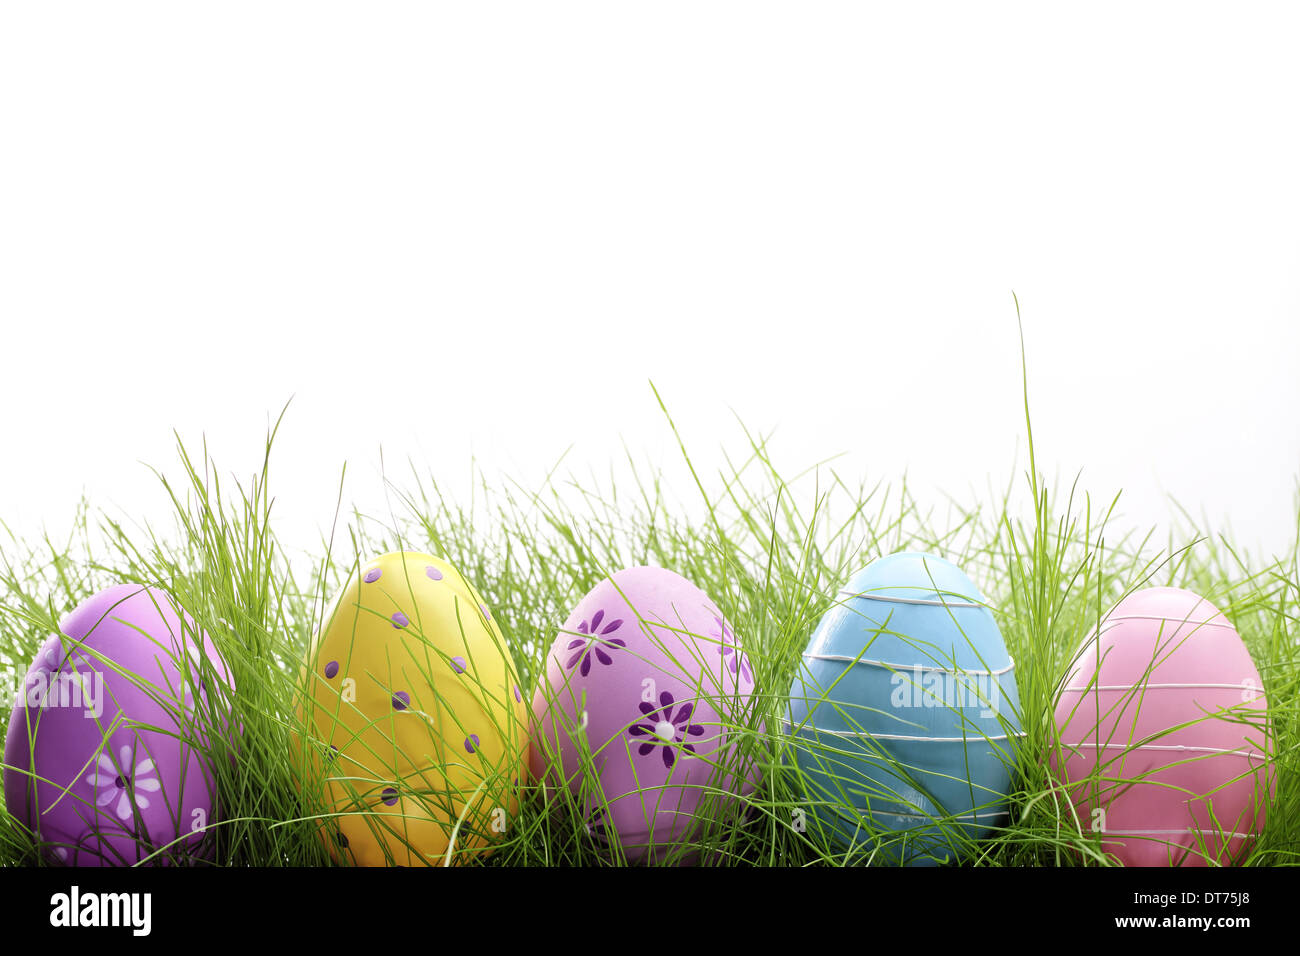 Row of Easter eggs in Fresh Green Grass Stock Photo